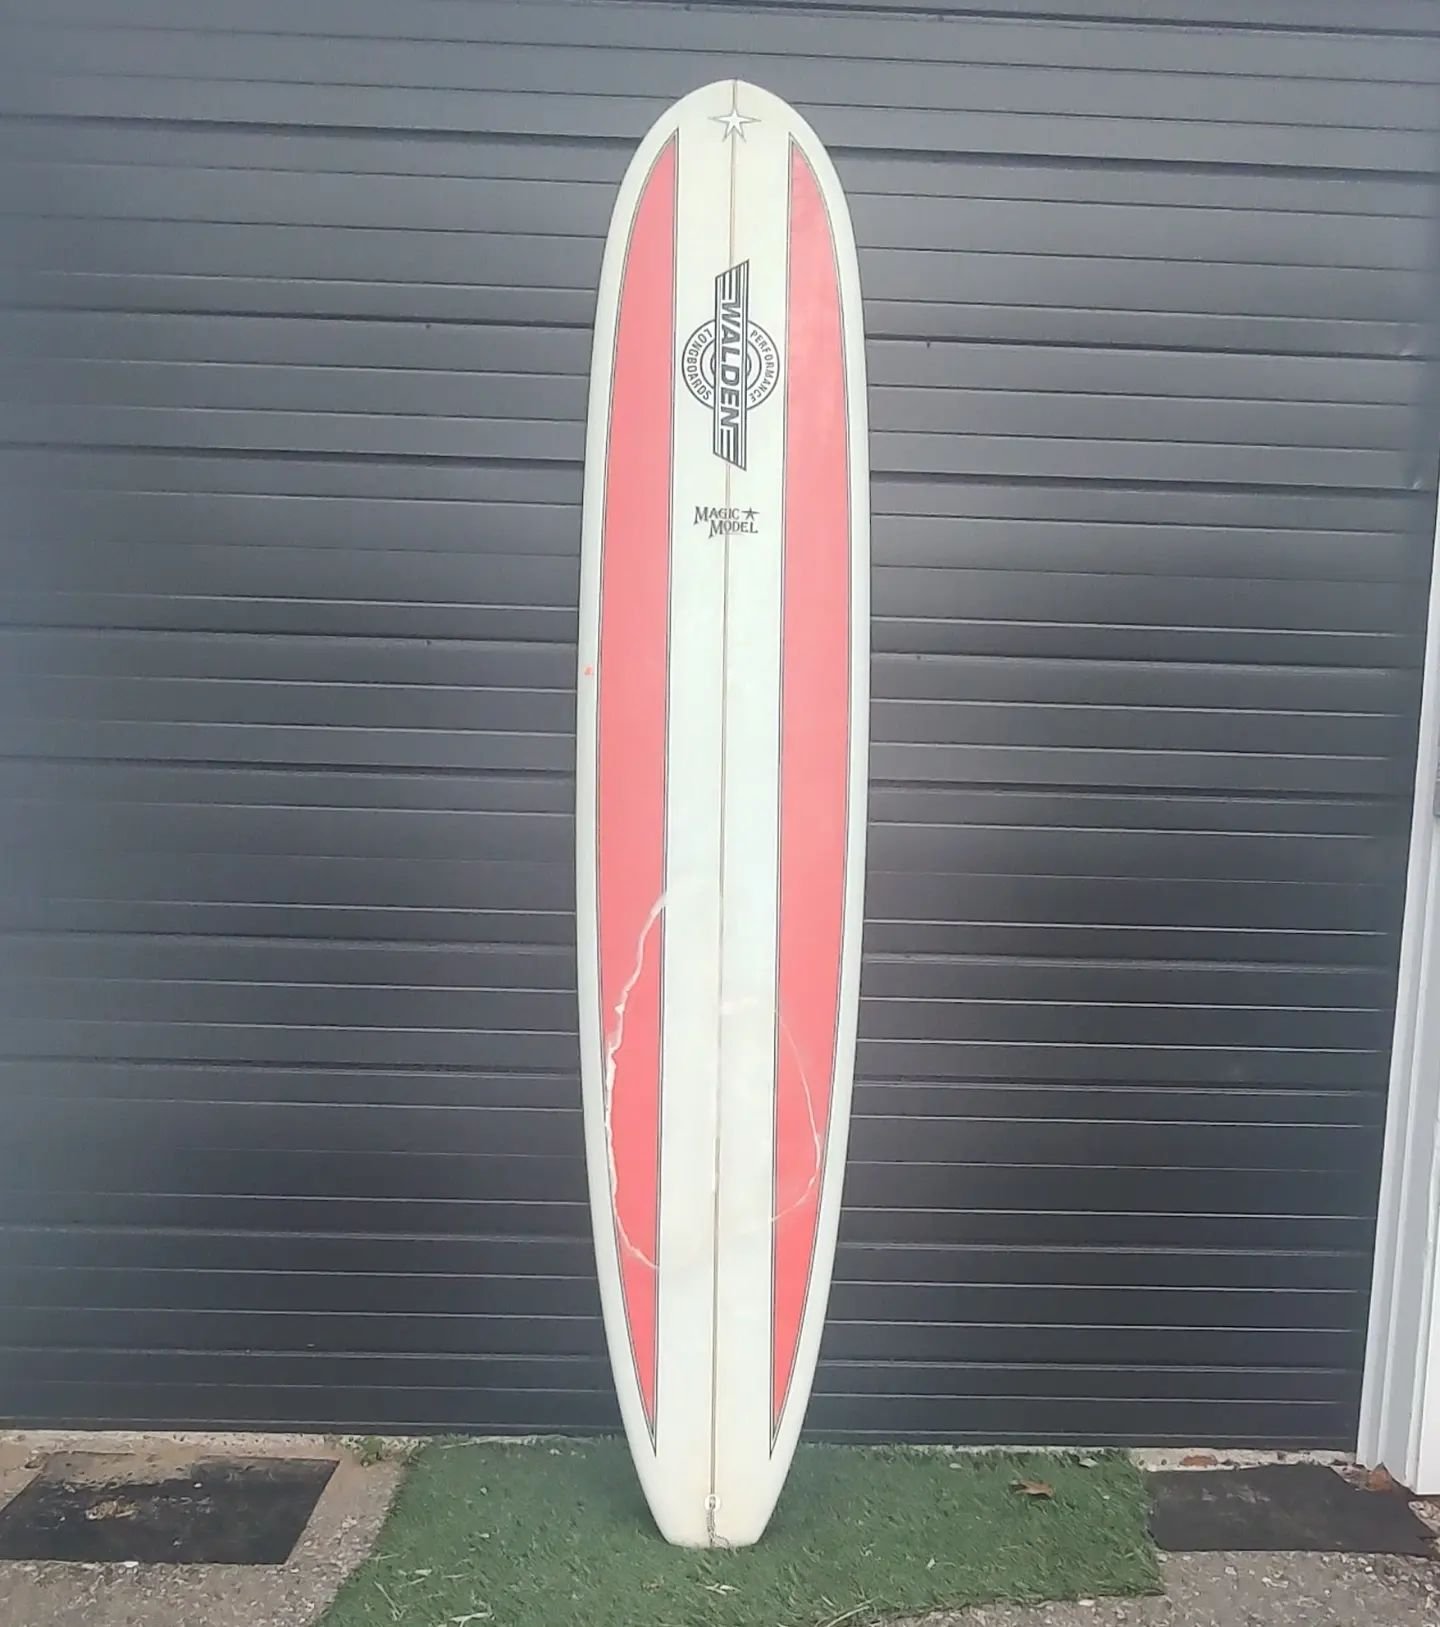 9'2 Walden Magic 22 1/2 x 3 75L 
2+1  with PU construction
Used with deck delam repair
Fair/good condition 
$299